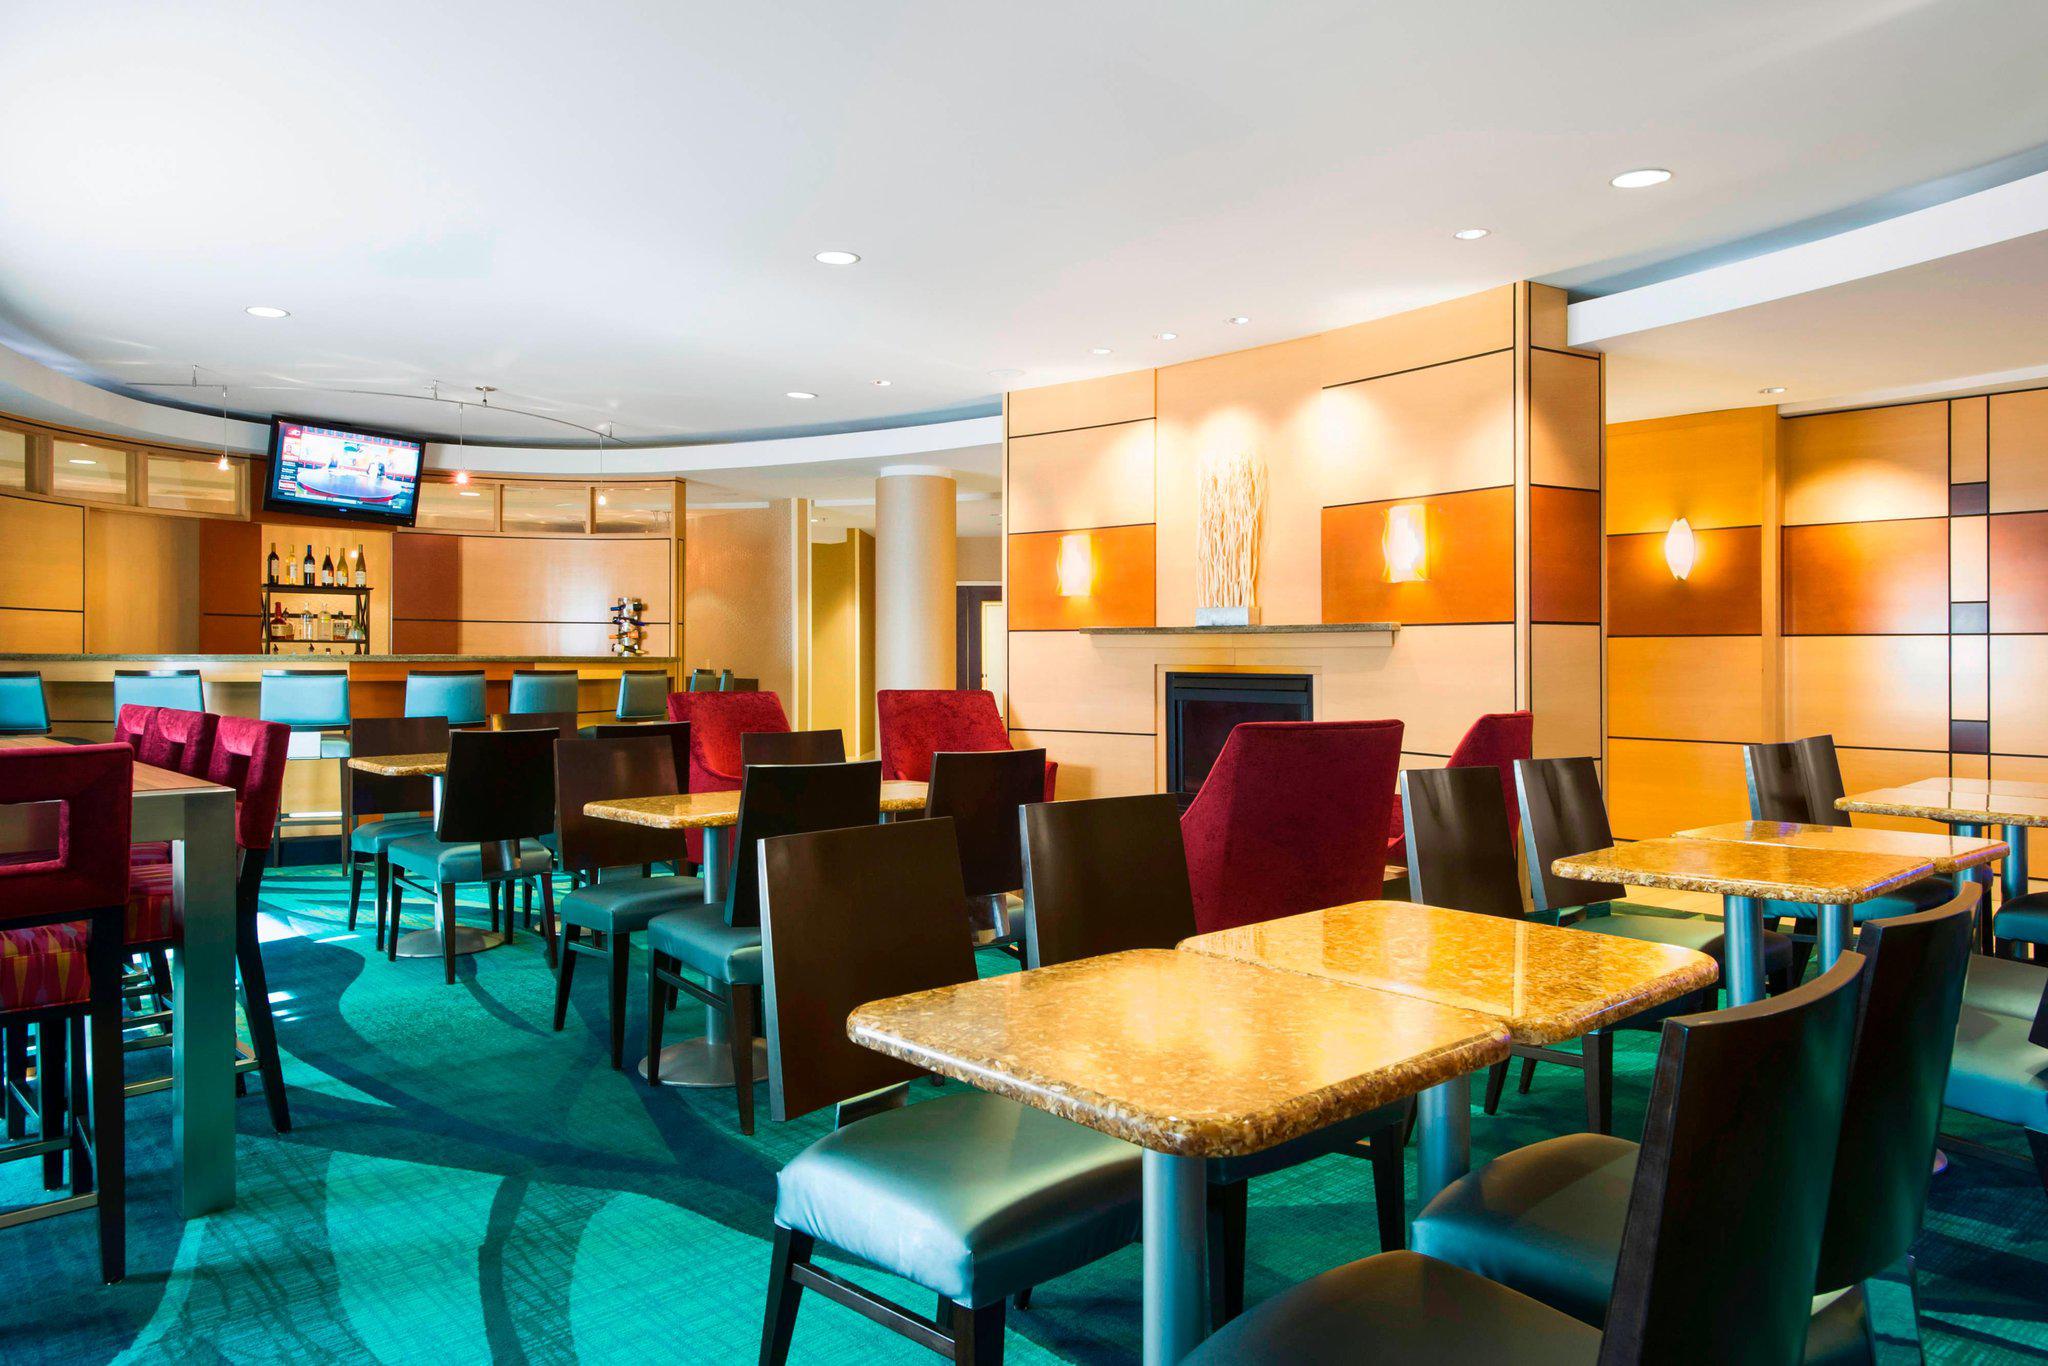 SpringHill Suites by Marriott Omaha East/Council Bluffs, IA Photo